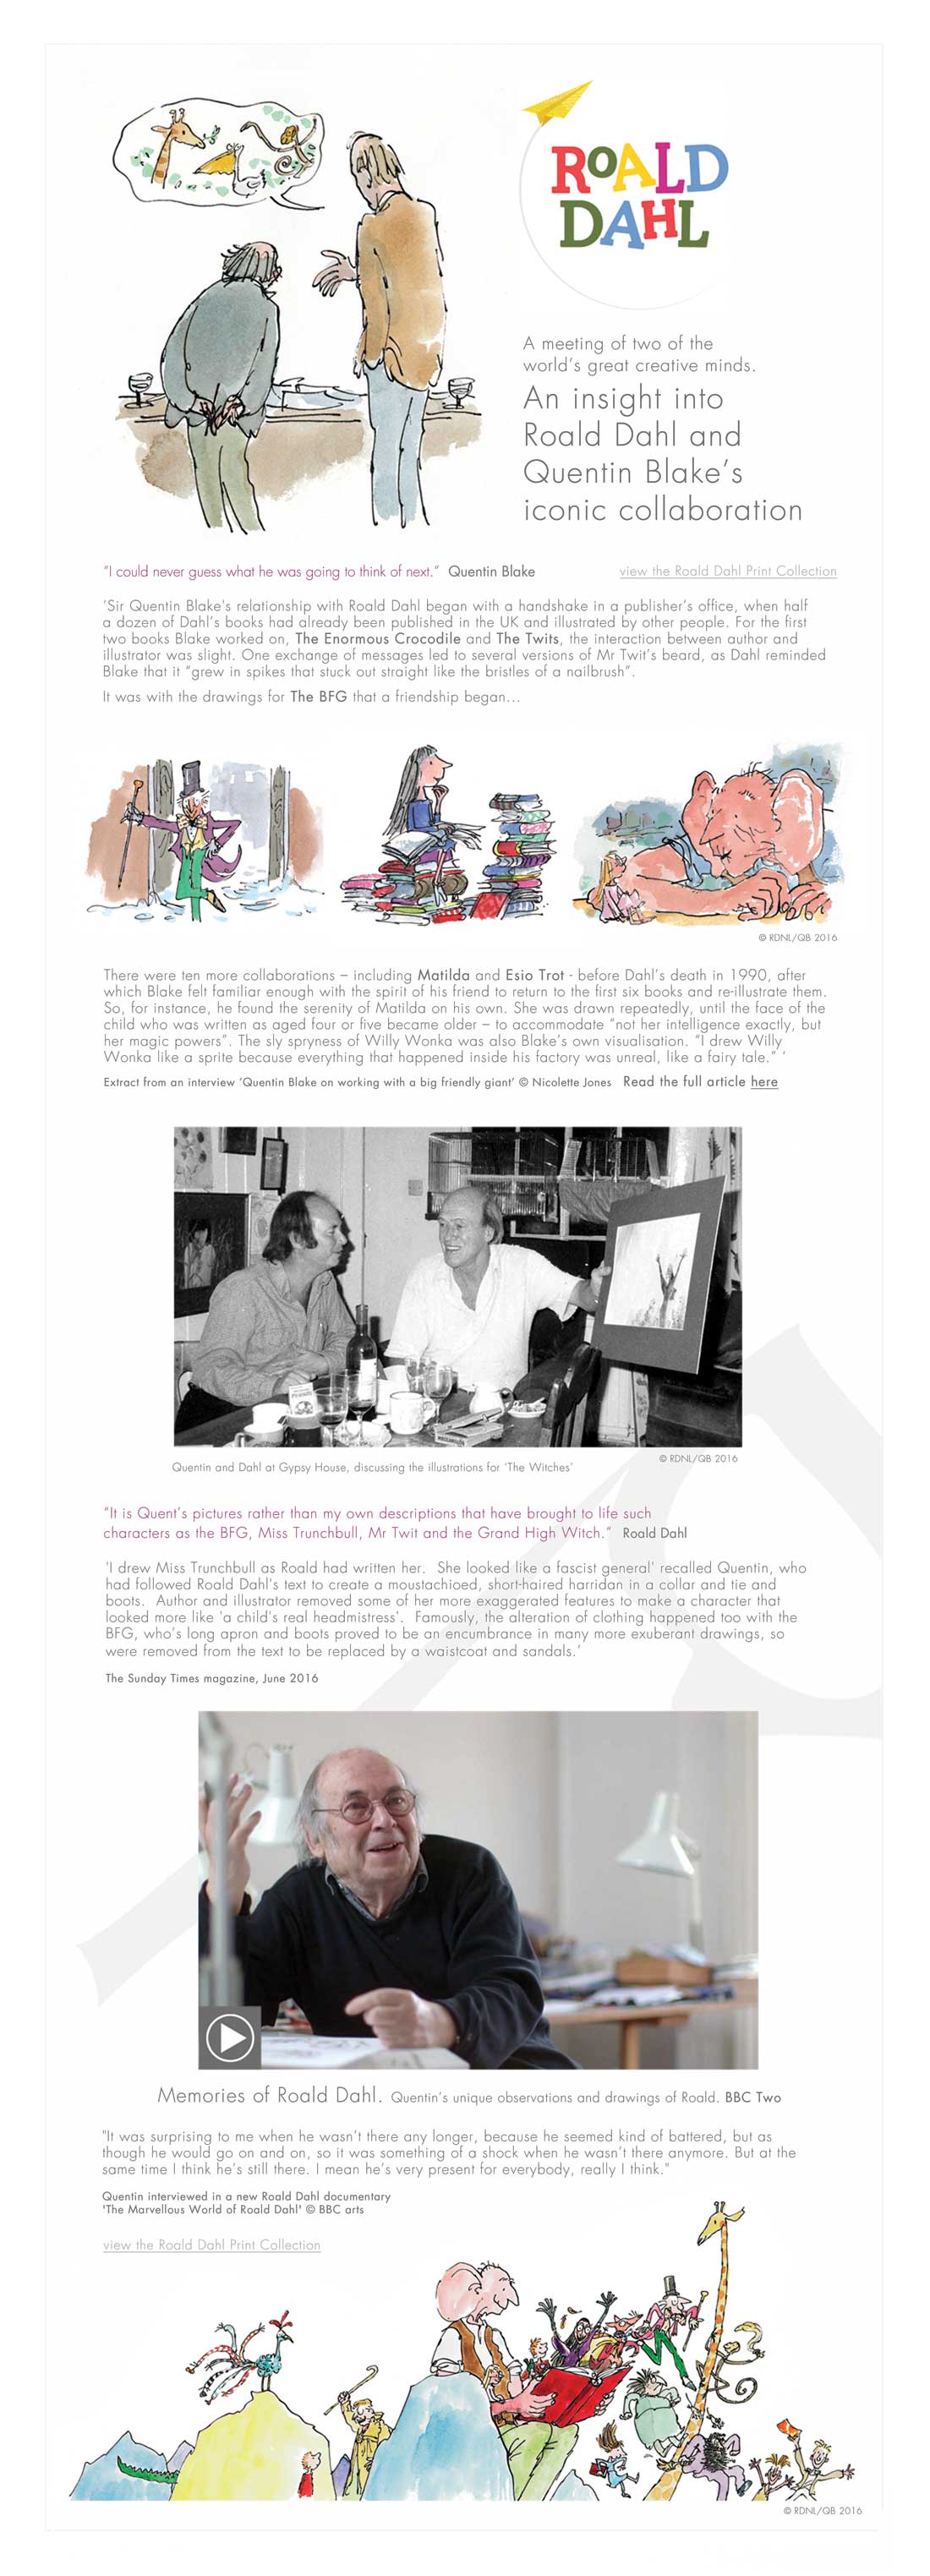 A meeting of two of the  world’s great creative minds. An insight into  Roald Dahl and  Quentin Blake’s  iconic collaboration “I could never guess what he was going to think of next.”  Quentin Blake ‘Sir Quentin Blake's relationship with Roald Dahl began with a handshake in a publisher’s office, when half  a dozen of Dahl’s books had already been published in the UK and illustrated by other people. For the first two books Blake worked on, The Enormous Crocodile and The Twits, the interaction between author and  illustrator was slight. One exchange of messages led to several versions of Mr Twit’s beard, as Dahl reminded Blake that it “grew in spikes that stuck out straight like the bristles of a nailbrush”. It was with the drawings for The BFG that a friendship began... “It is Quent’s pictures rather than my own descriptions that have brought to life such  characters as the BFG, Miss Trunchbull, Mr Twit and the Grand High Witch.”  Roald Dahl 'I drew Miss Trunchbull as Roald had written her.  She looked like a fascist general' recalled Quentin, who had followed Roald Dahl's text to create a moustachioed, short-haired harridan in a collar and tie and boots.  Author and illustrator removed some of her more exaggerated features to make a character that looked more like 'a child's real headmistress'.  Famously, the alteration of clothing happened too with the BFG, who’s long apron and boots proved to be an encumbrance in many more exuberant drawings, so were removed from the text to be replaced by a waistcoat and sandals.’   "It was surprising to me when he wasn’t there any longer, because he seemed kind of battered, but as though he would go on and on, so it was something of a shock when he wasn’t there anymore. But at the same time I think he’s still there. I mean he’s very present for everybody, really I think." 